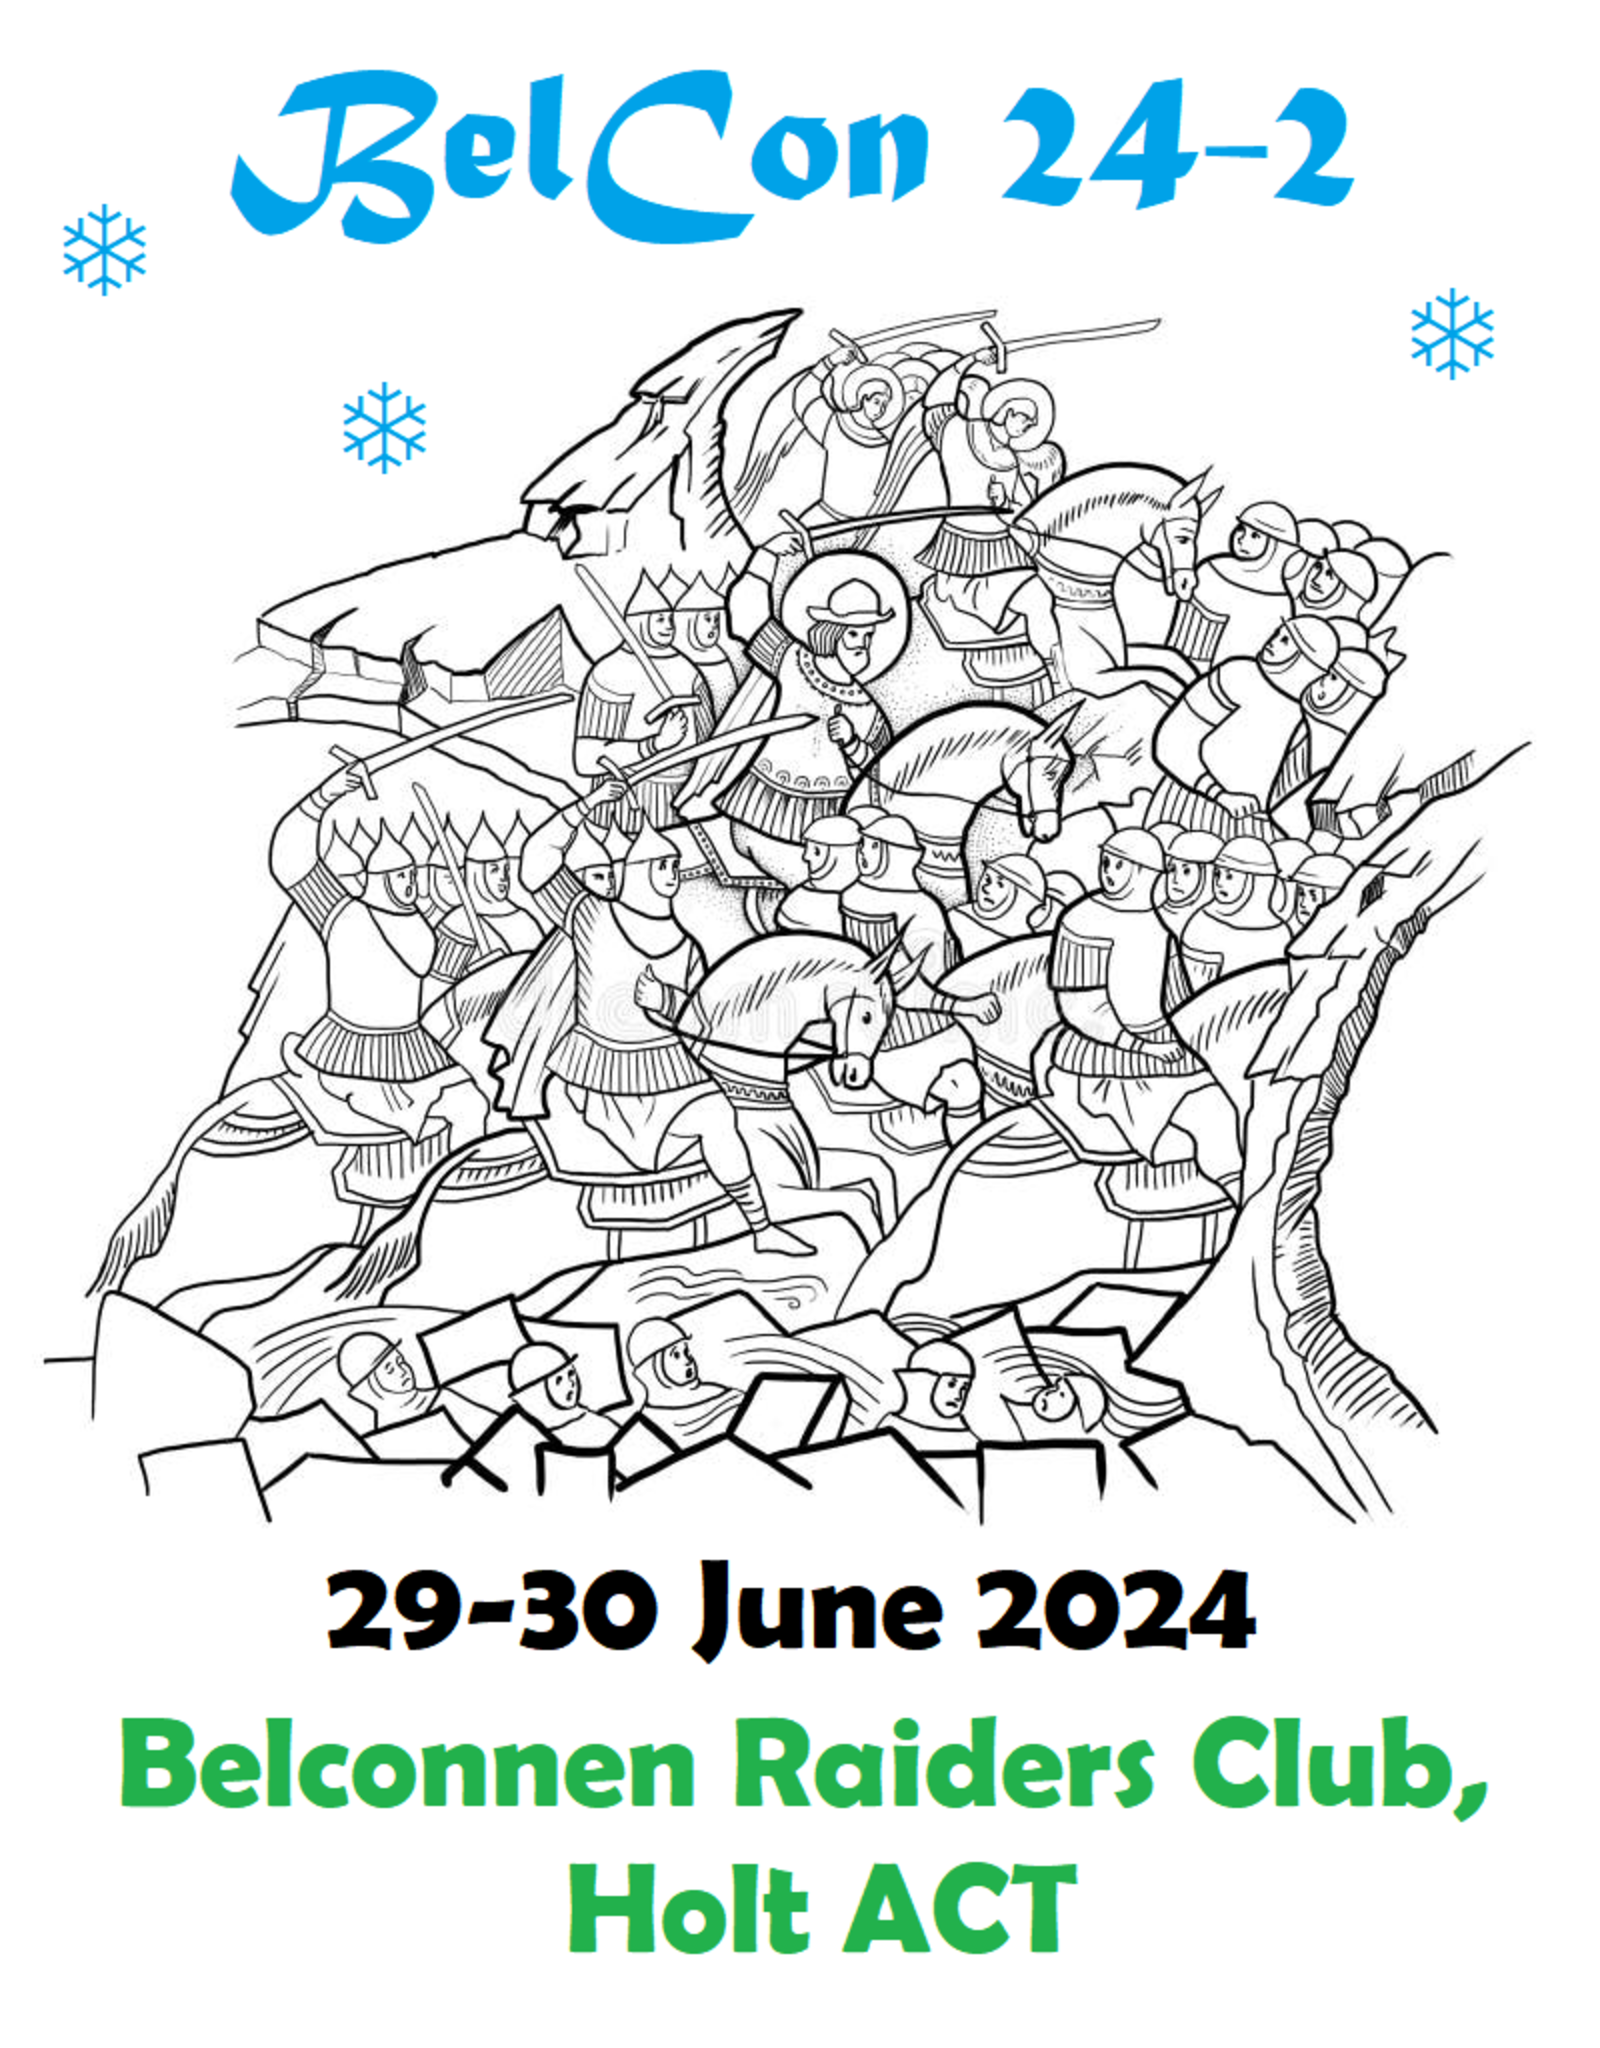 Olympian Games BelCon 24-2 entry ticket - Warhammer Old World